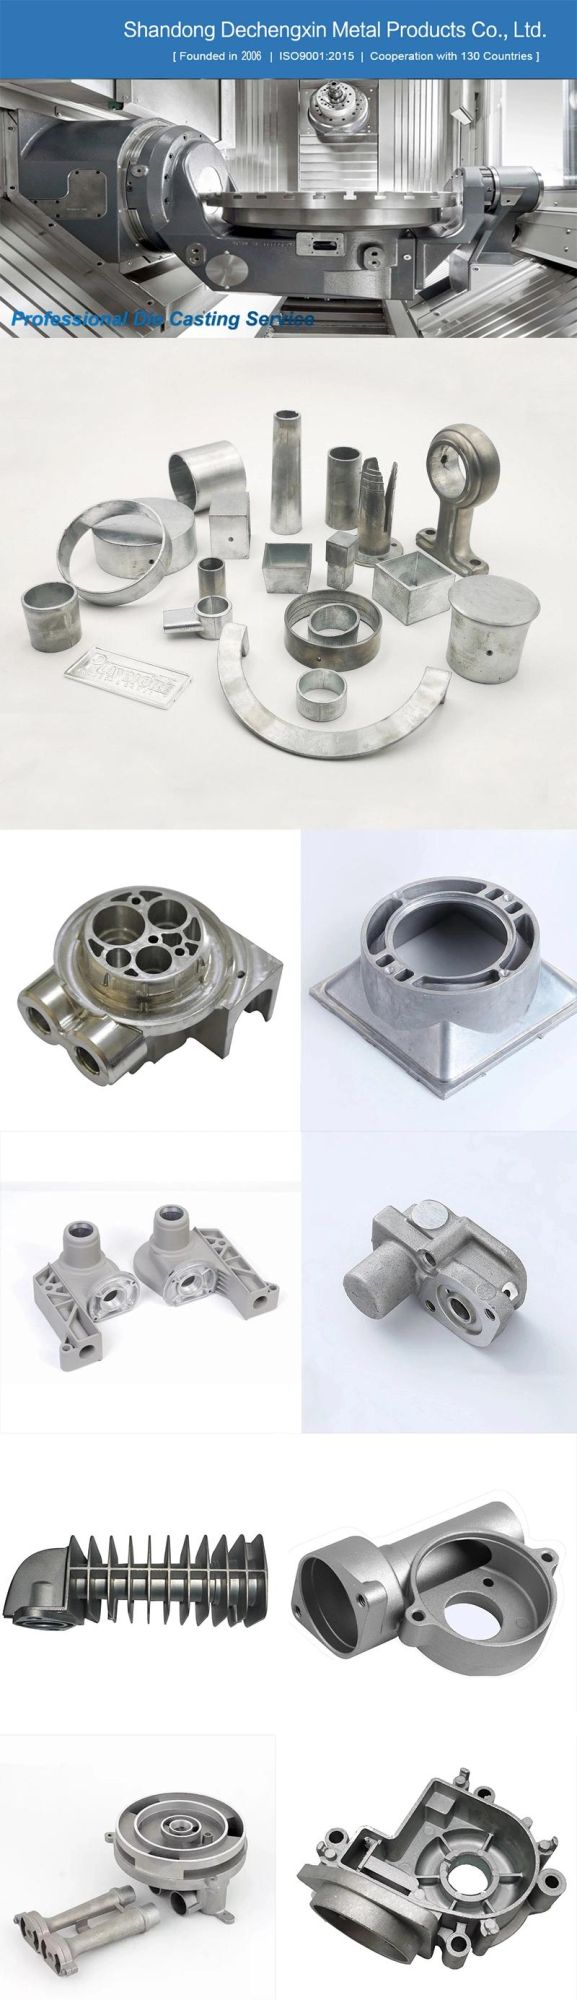 OEM Aluminum Injection Die Casting Office Furniture Parts Accessories